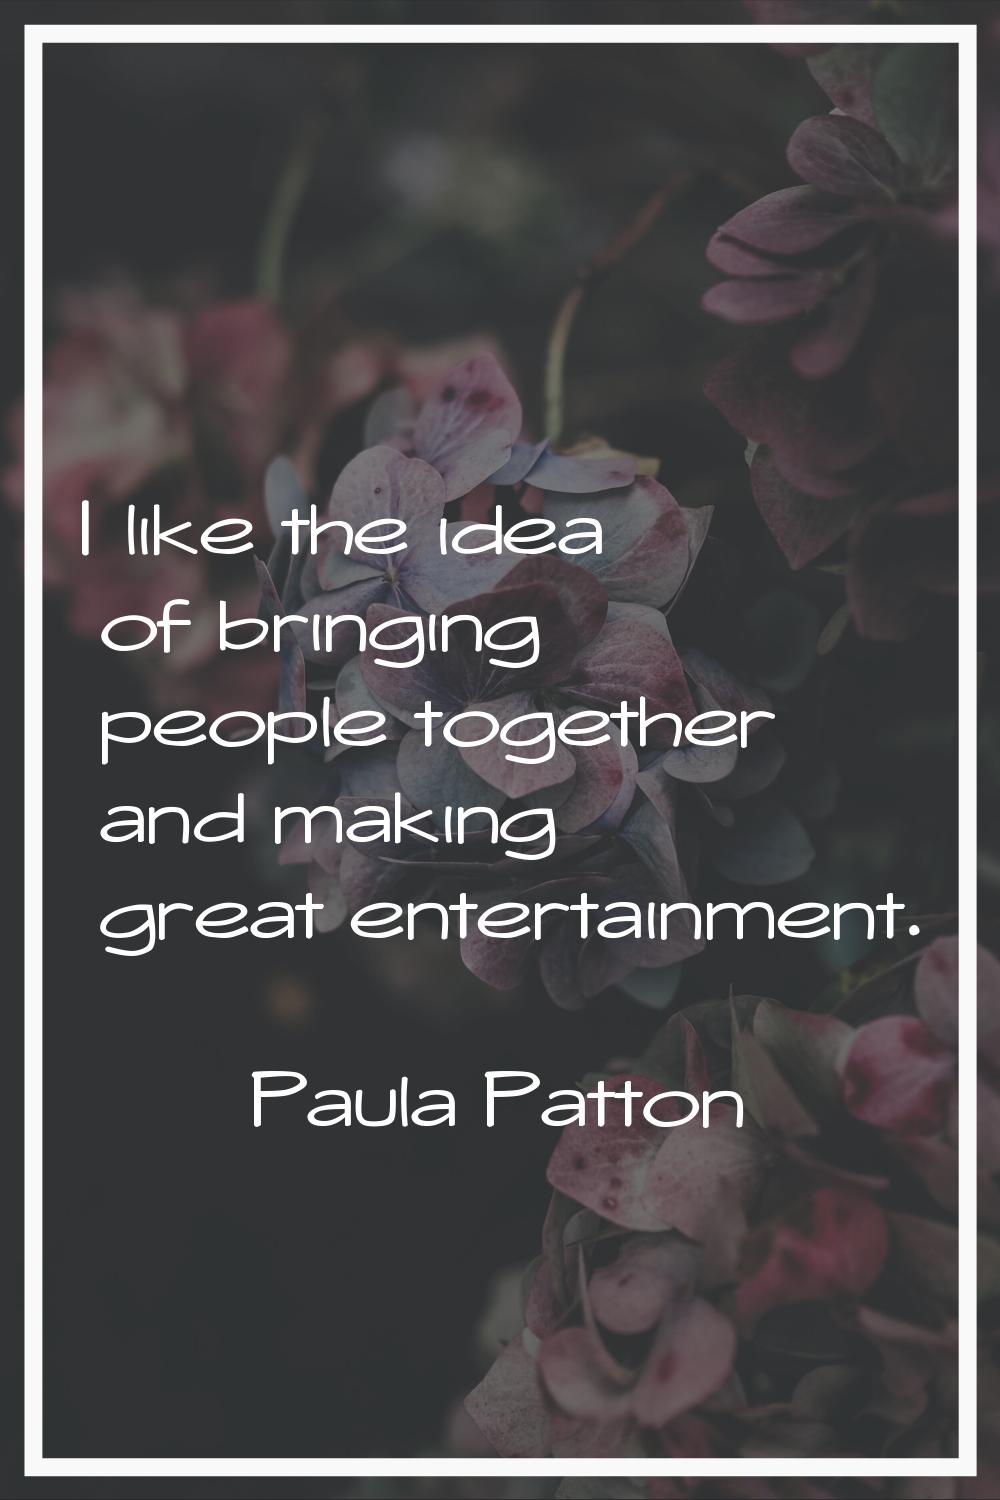 I like the idea of bringing people together and making great entertainment.